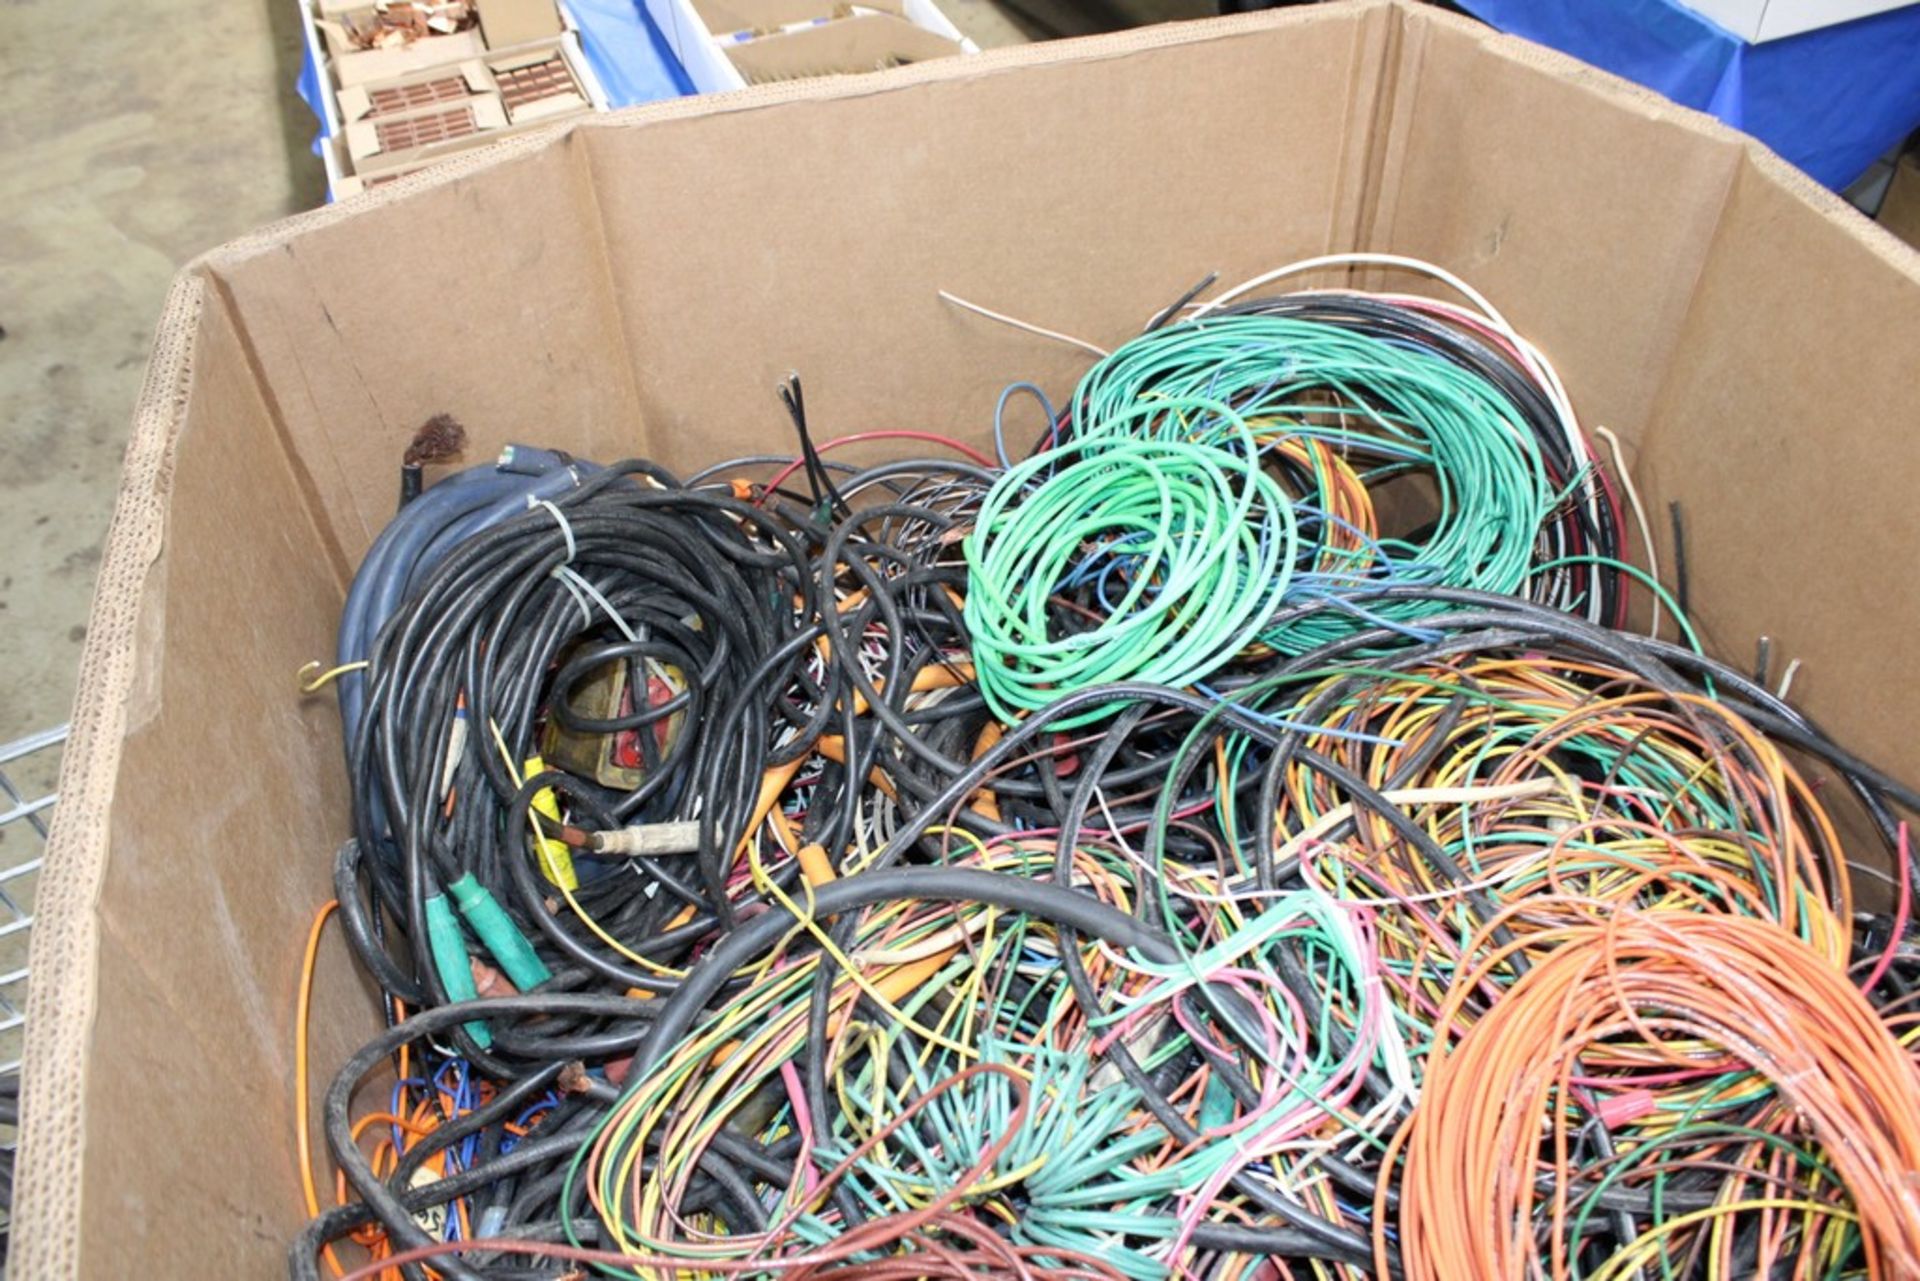 LARGE QUANTITY OF SCRAP WIRE IN CARDBOARD GAYLORD - Image 2 of 4